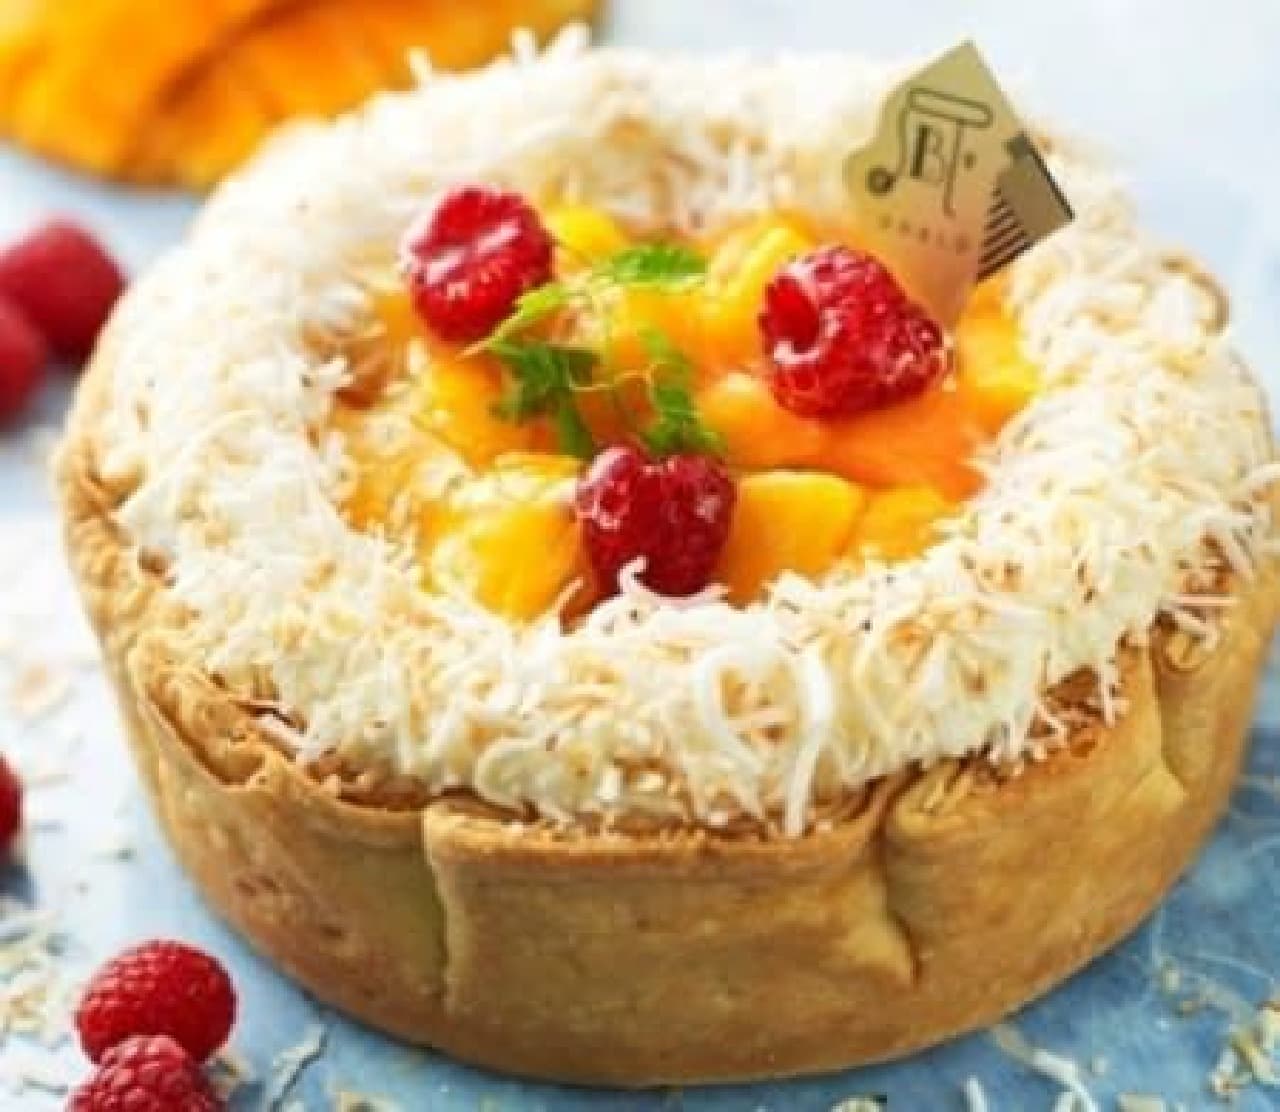 A new item has been added to the freshly baked cheese tart!